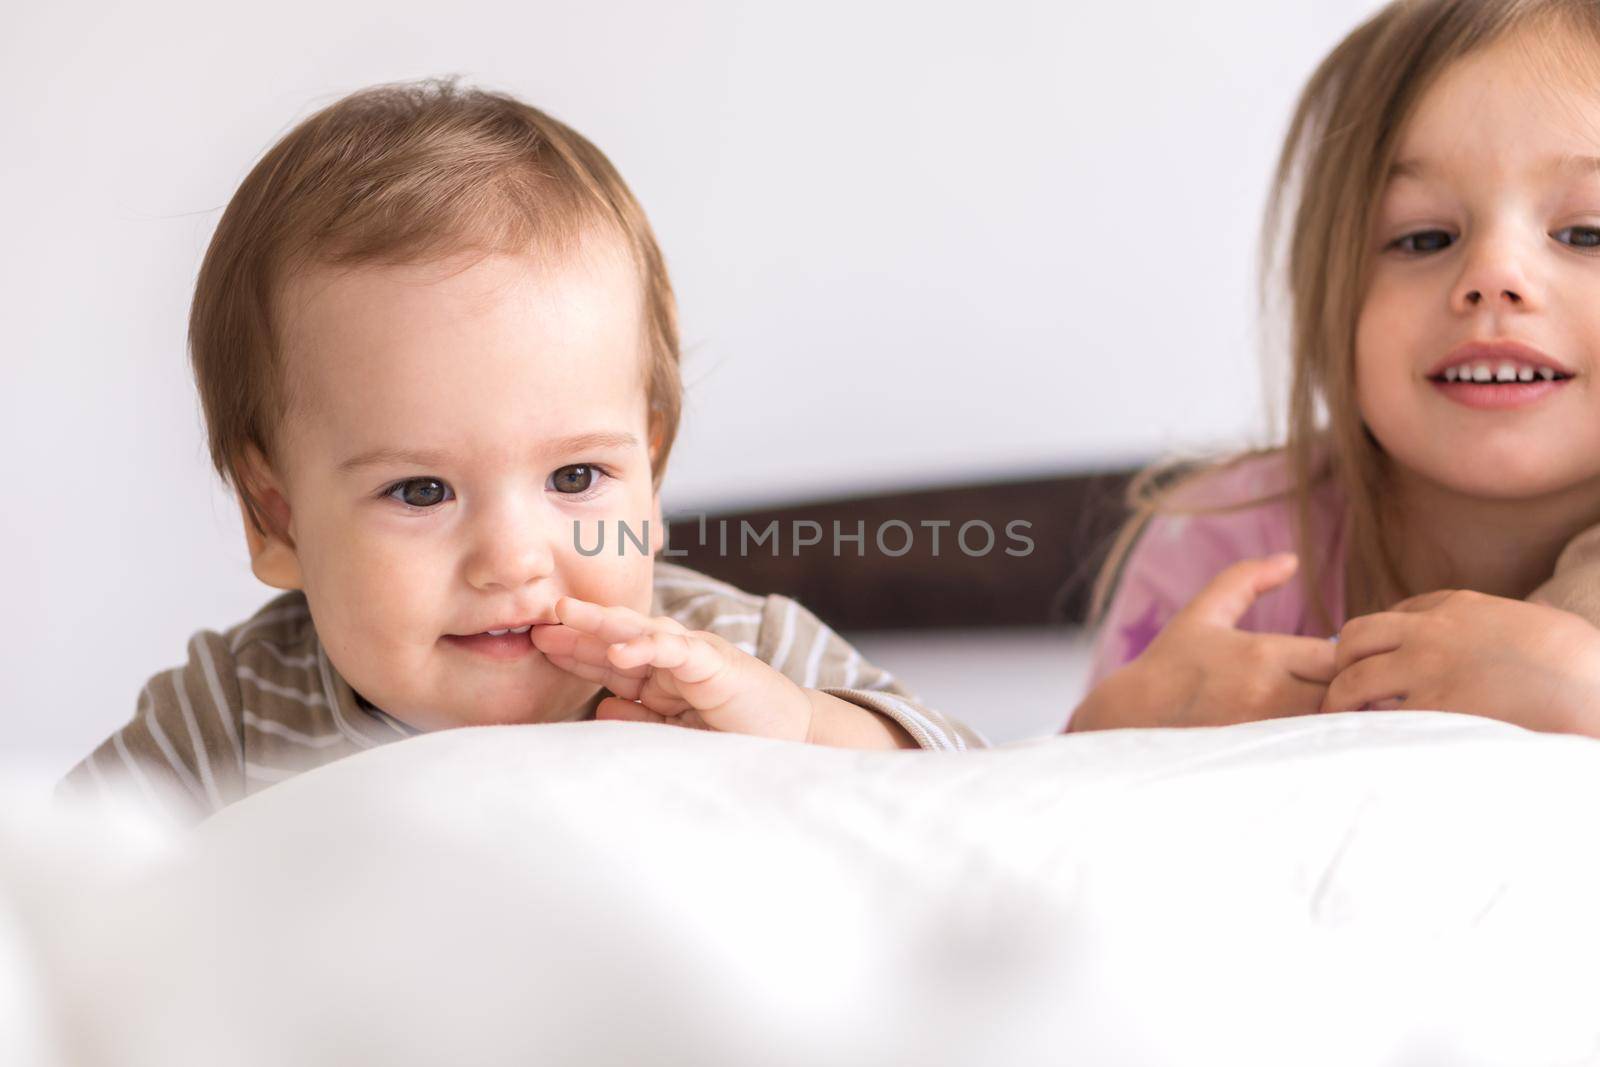 Little Preschool Toddler Minor Children Siblings Kids Watch Cartoon Use Smartphone Phone Device Together. Baby In Pajama On White Bed At Home Bedroom. Family, Leisure, Childhood, Friendship Concept.